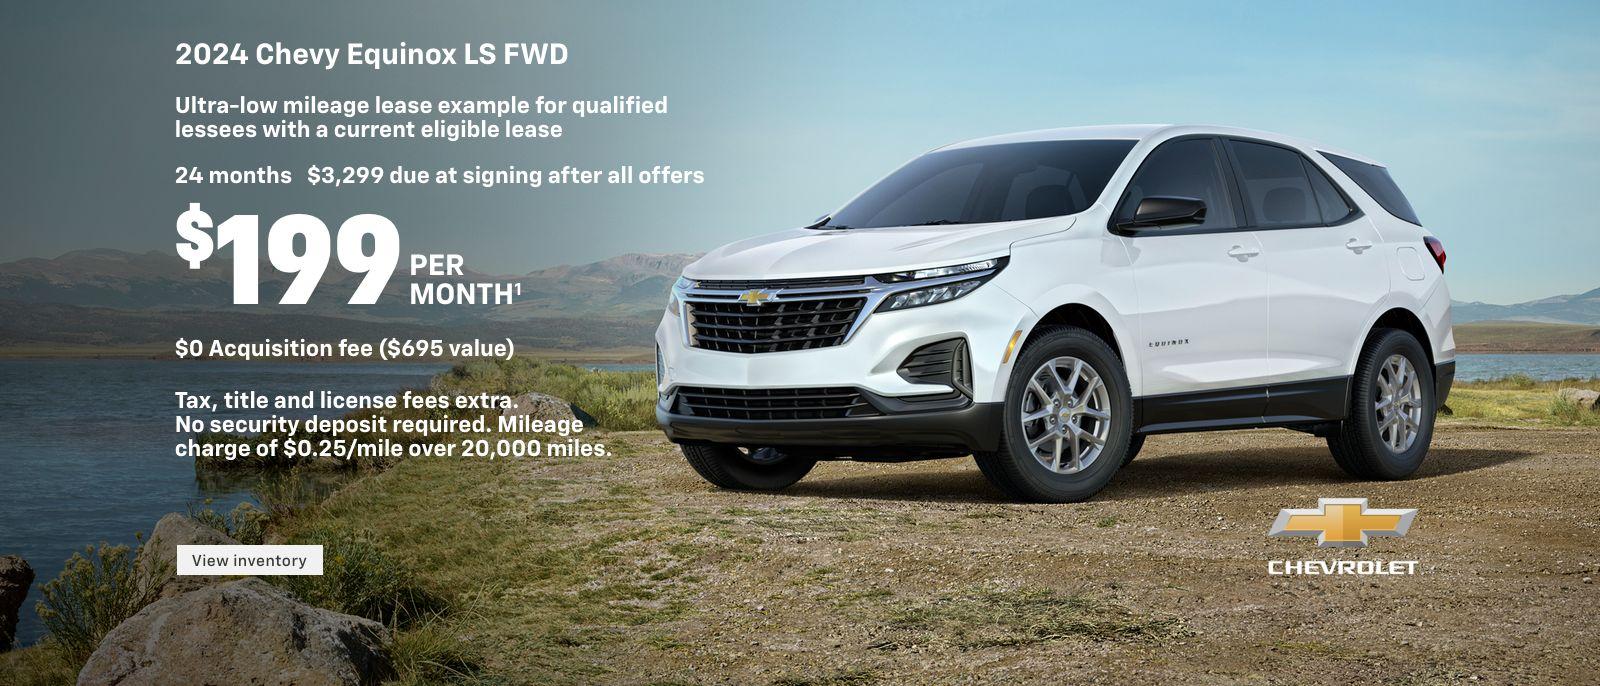 2024 Chevy Equinox LS FWD. Ultra-low mileage lease example for qualified lessees with a current eligible lease. $199 per month. 24 months. $3,299 due at signing after all offers. $0 Acquisition fee ($695 value). Tax, title and license fees extra. No security deposit required. Mileage charge of $0.25/mile over 20,000 miles.